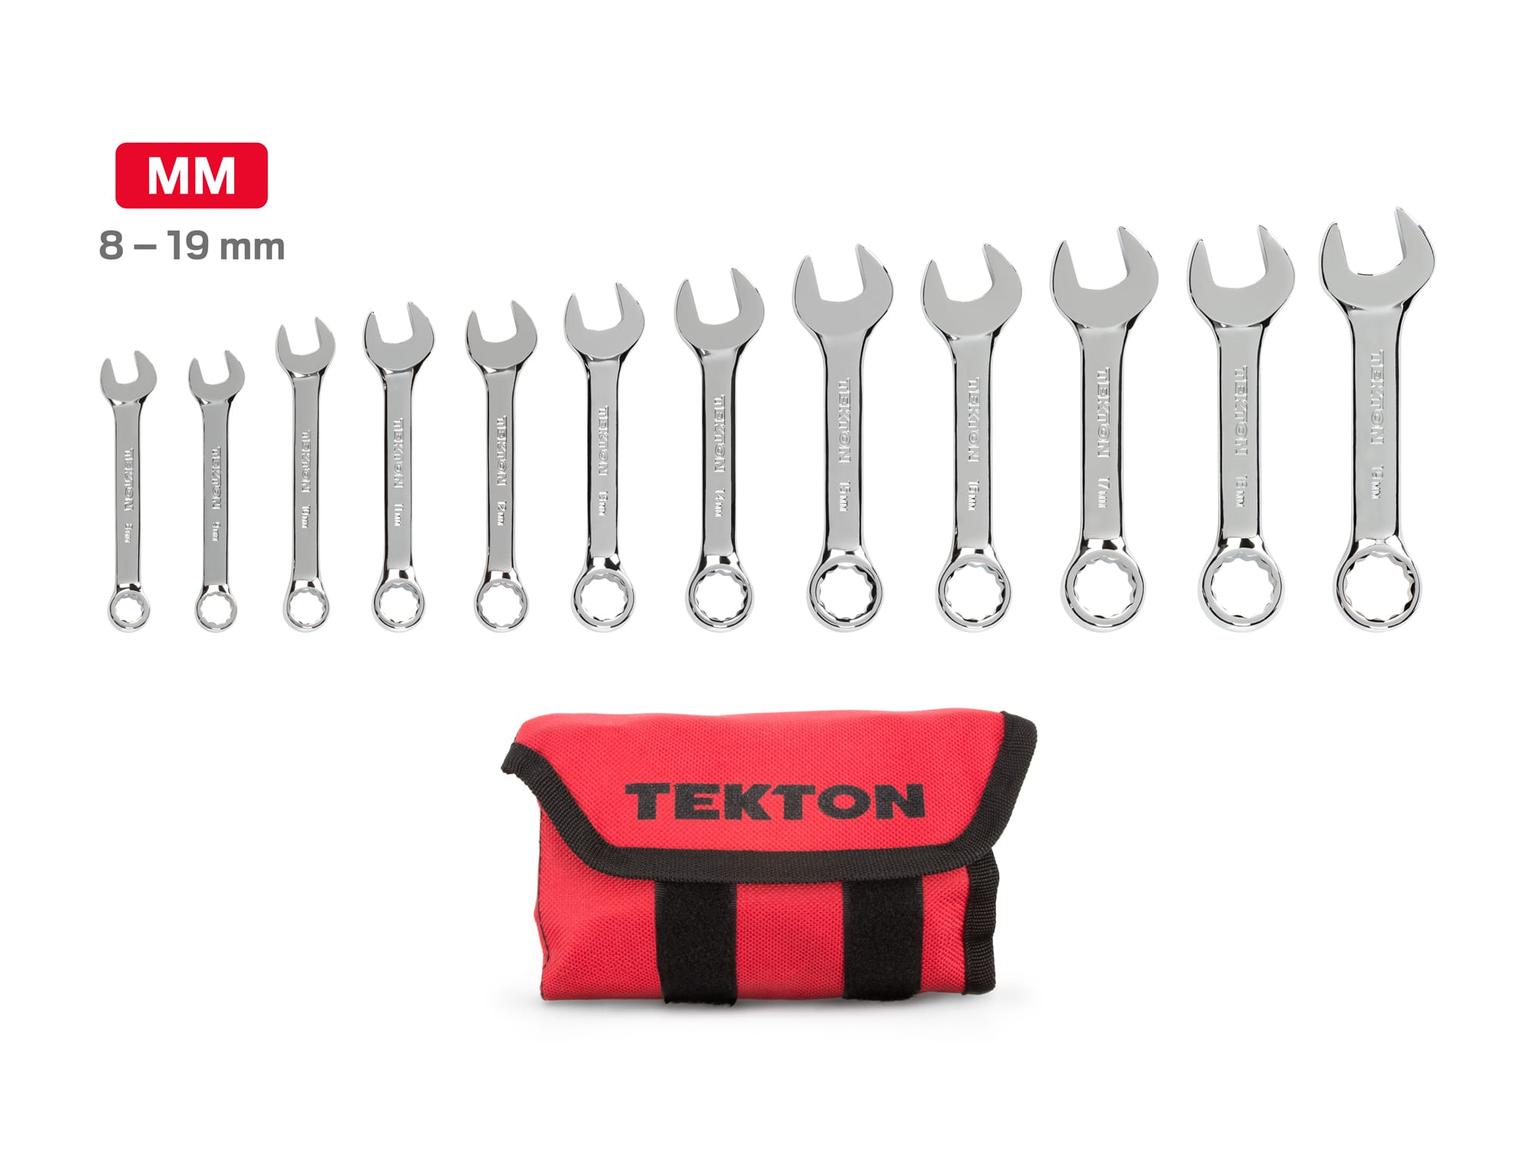 TEKTON WRN01190-T Stubby Combination Wrench Set with Pouch, 12-Piece (8 - 19 mm)